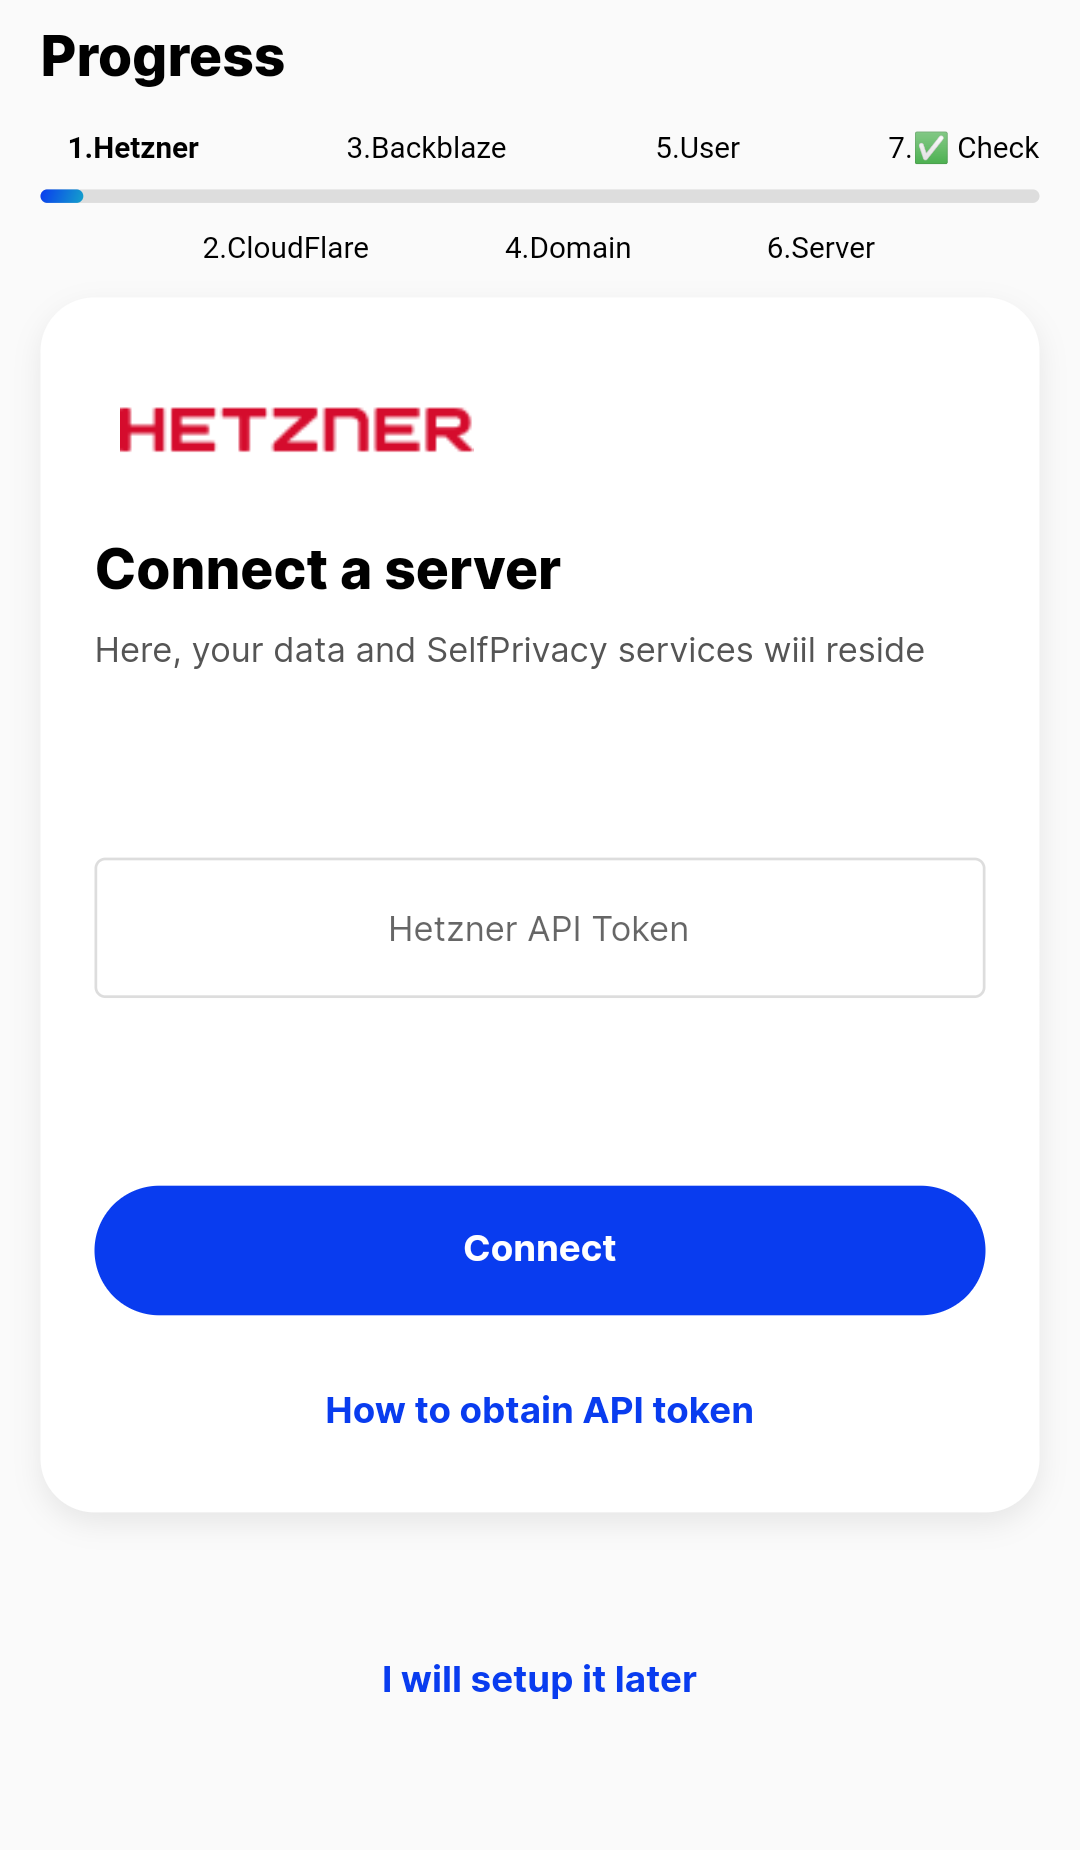 Connecting a server to SelfPrivacy